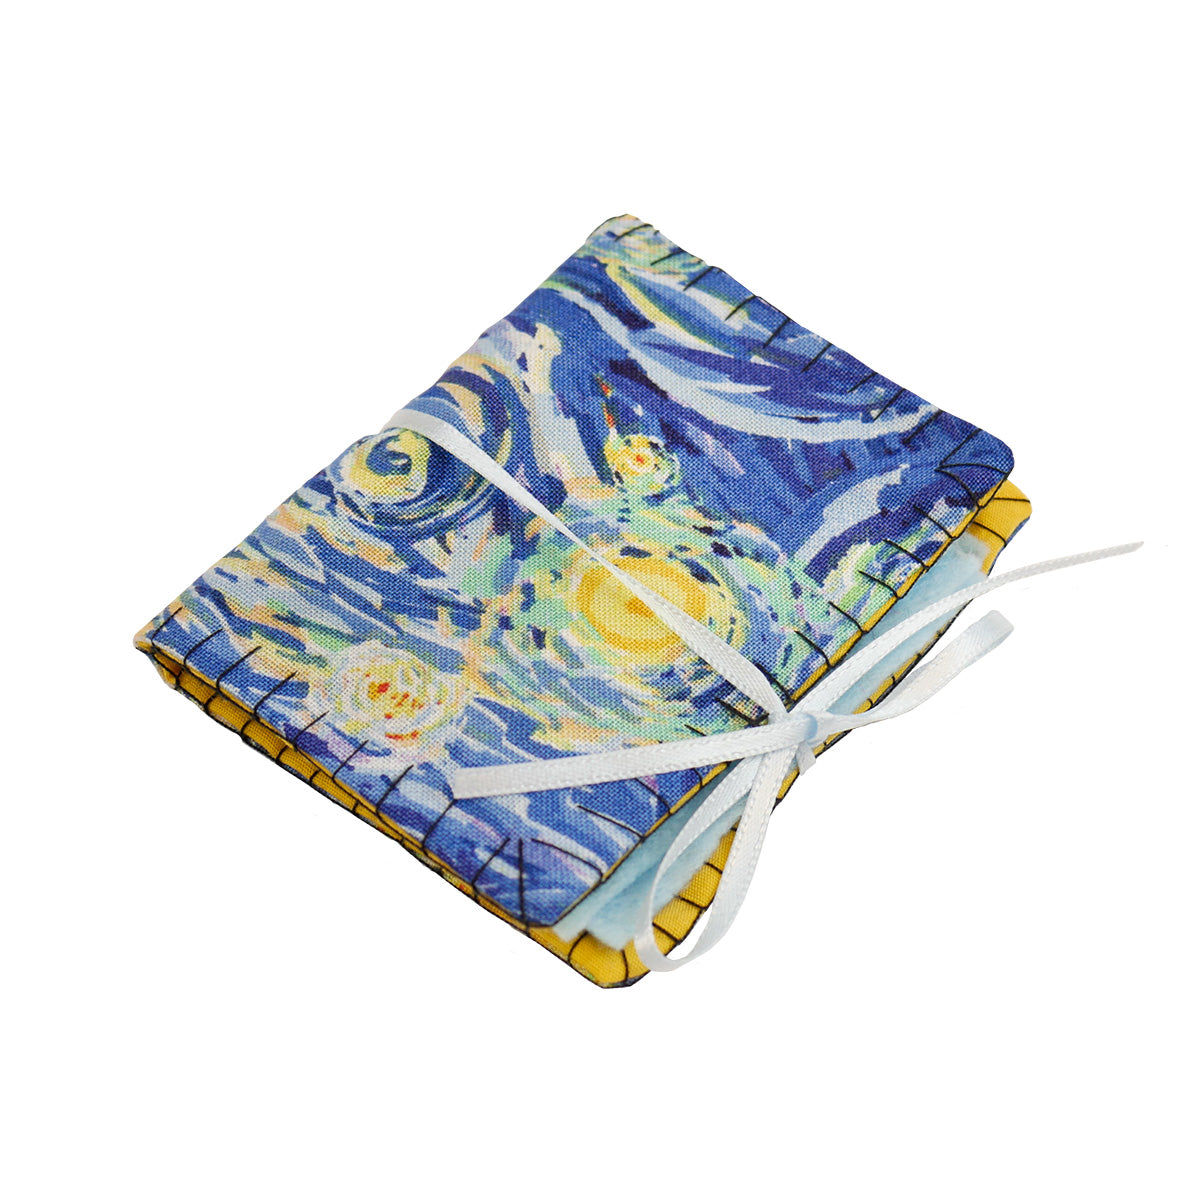 A single completed Needle Book with a starry night patterned fabric on the outside, blue felt pages on the inside, and a thin light blue ribbon tying it closed around with a bow.